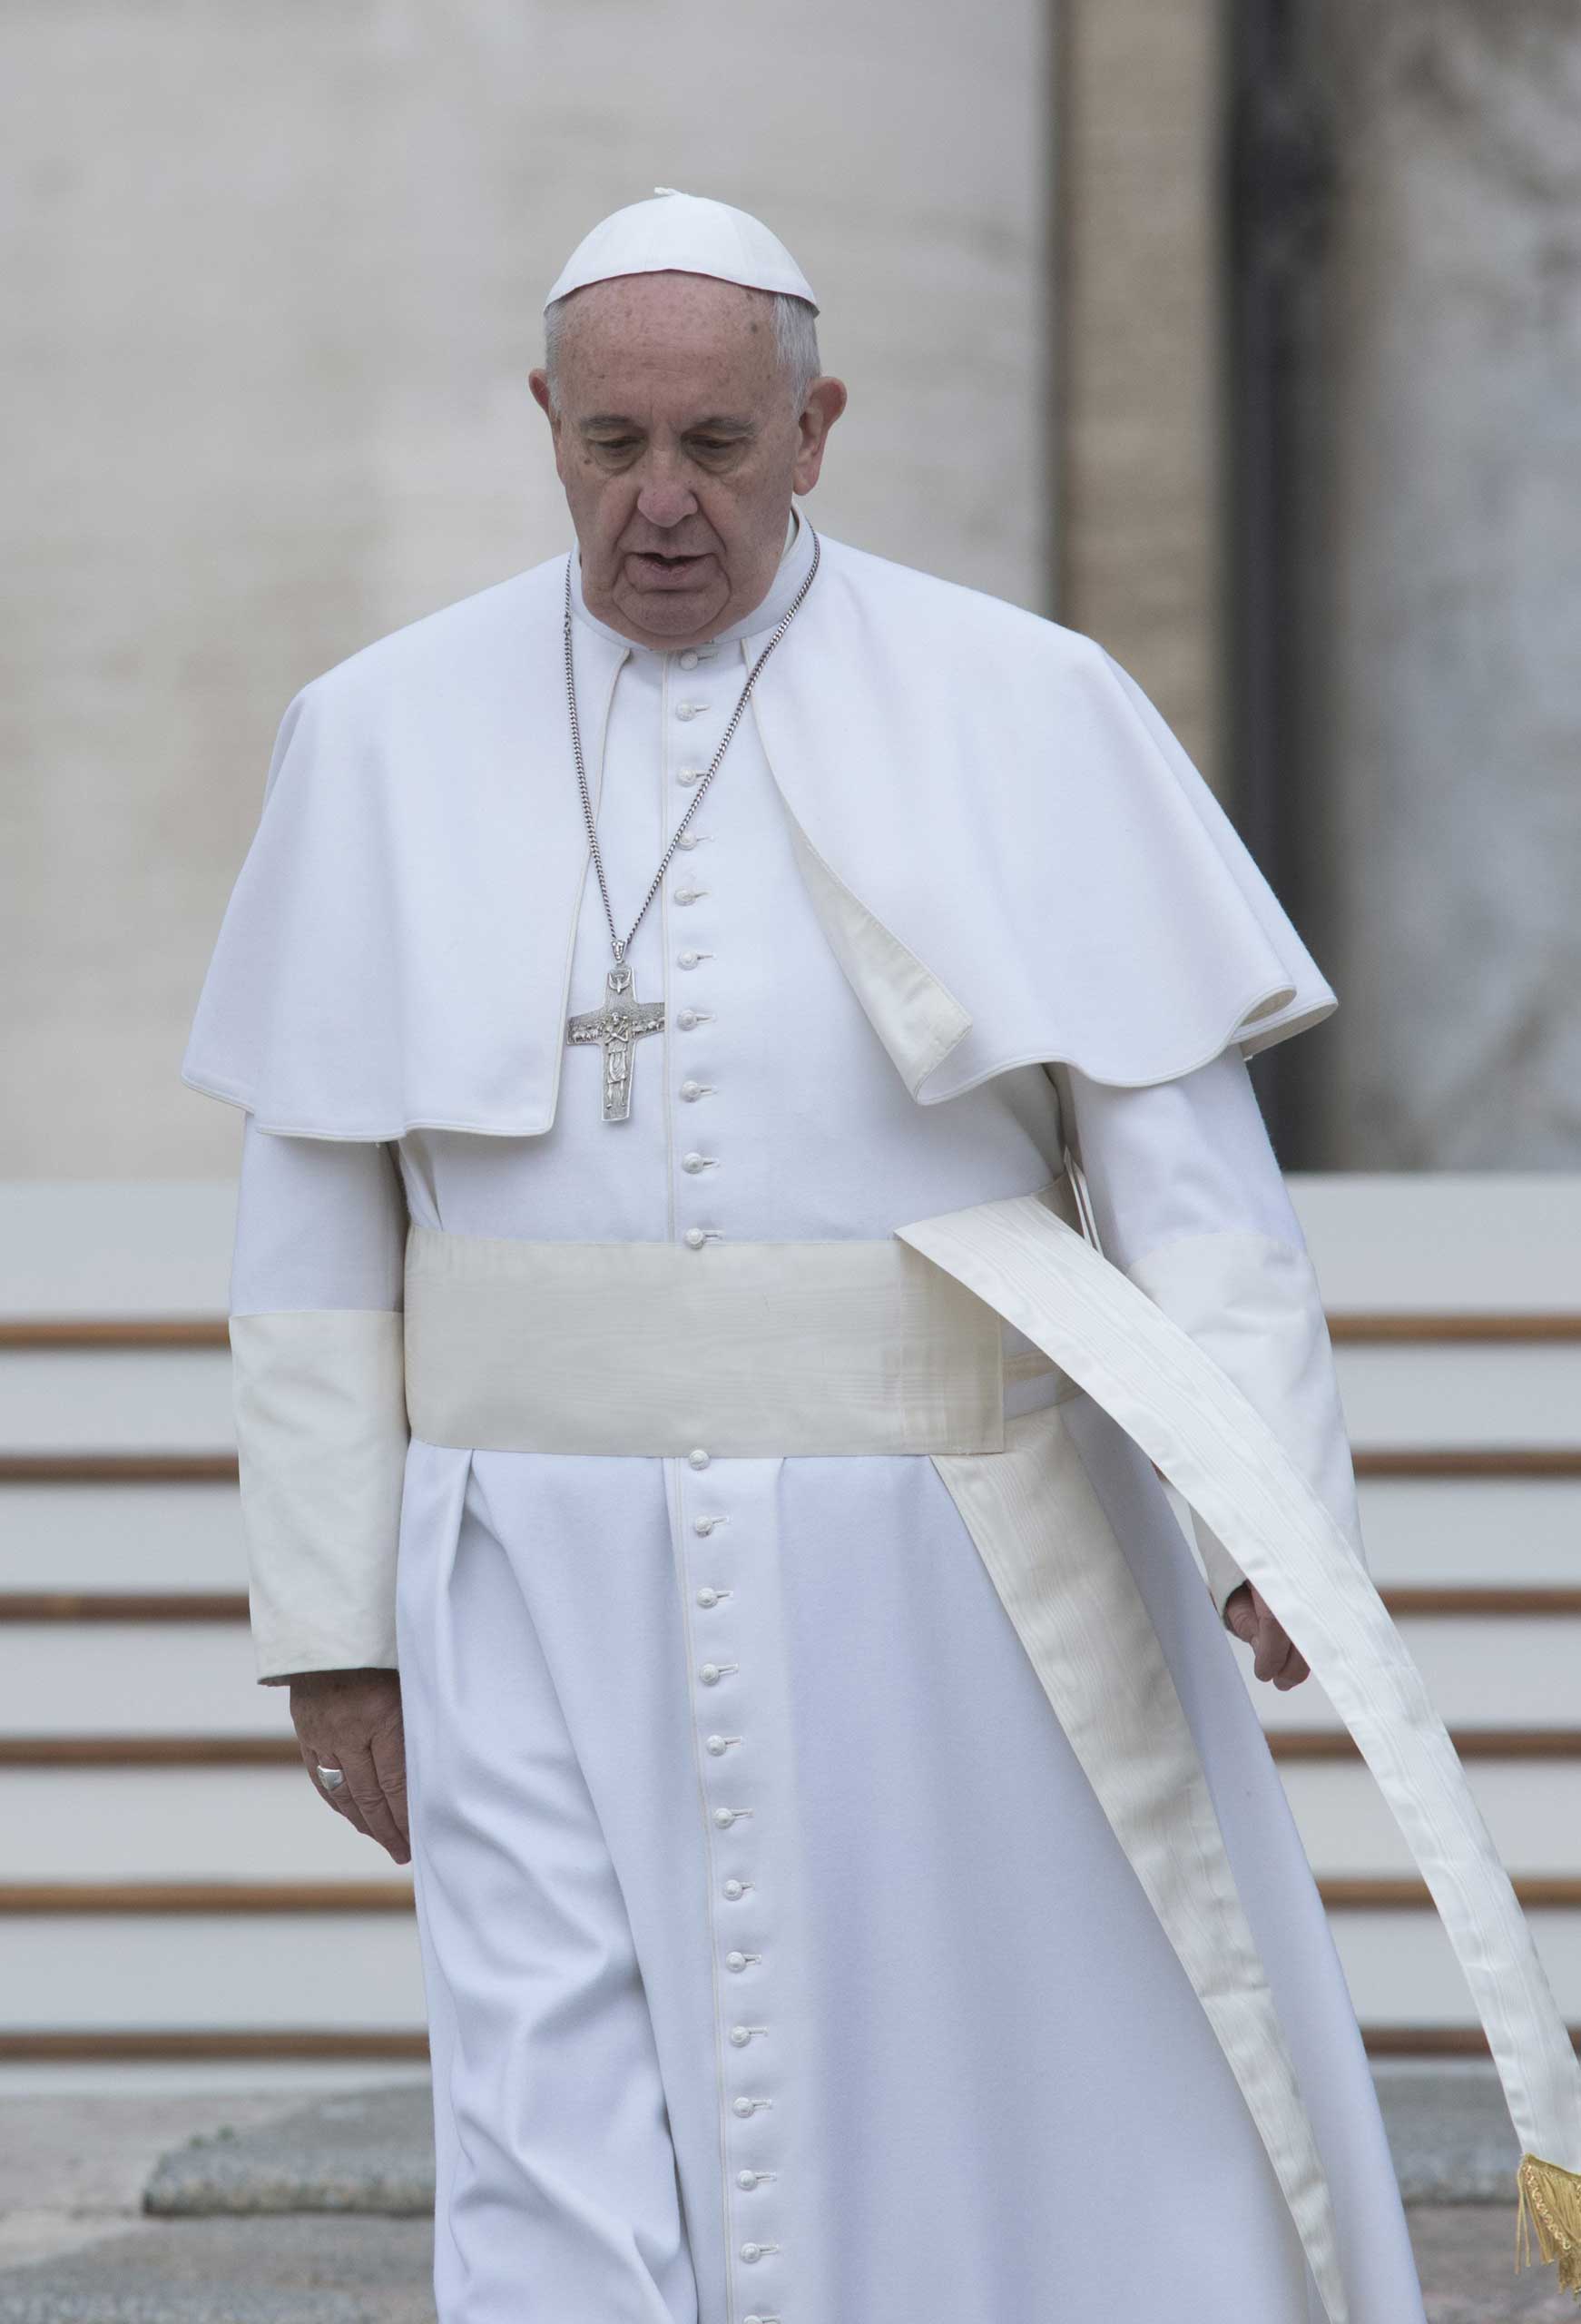 Pope Francis attends his weekly audience in St. Peter's Square on March 4, 2015 in Vatican City, Vatican.